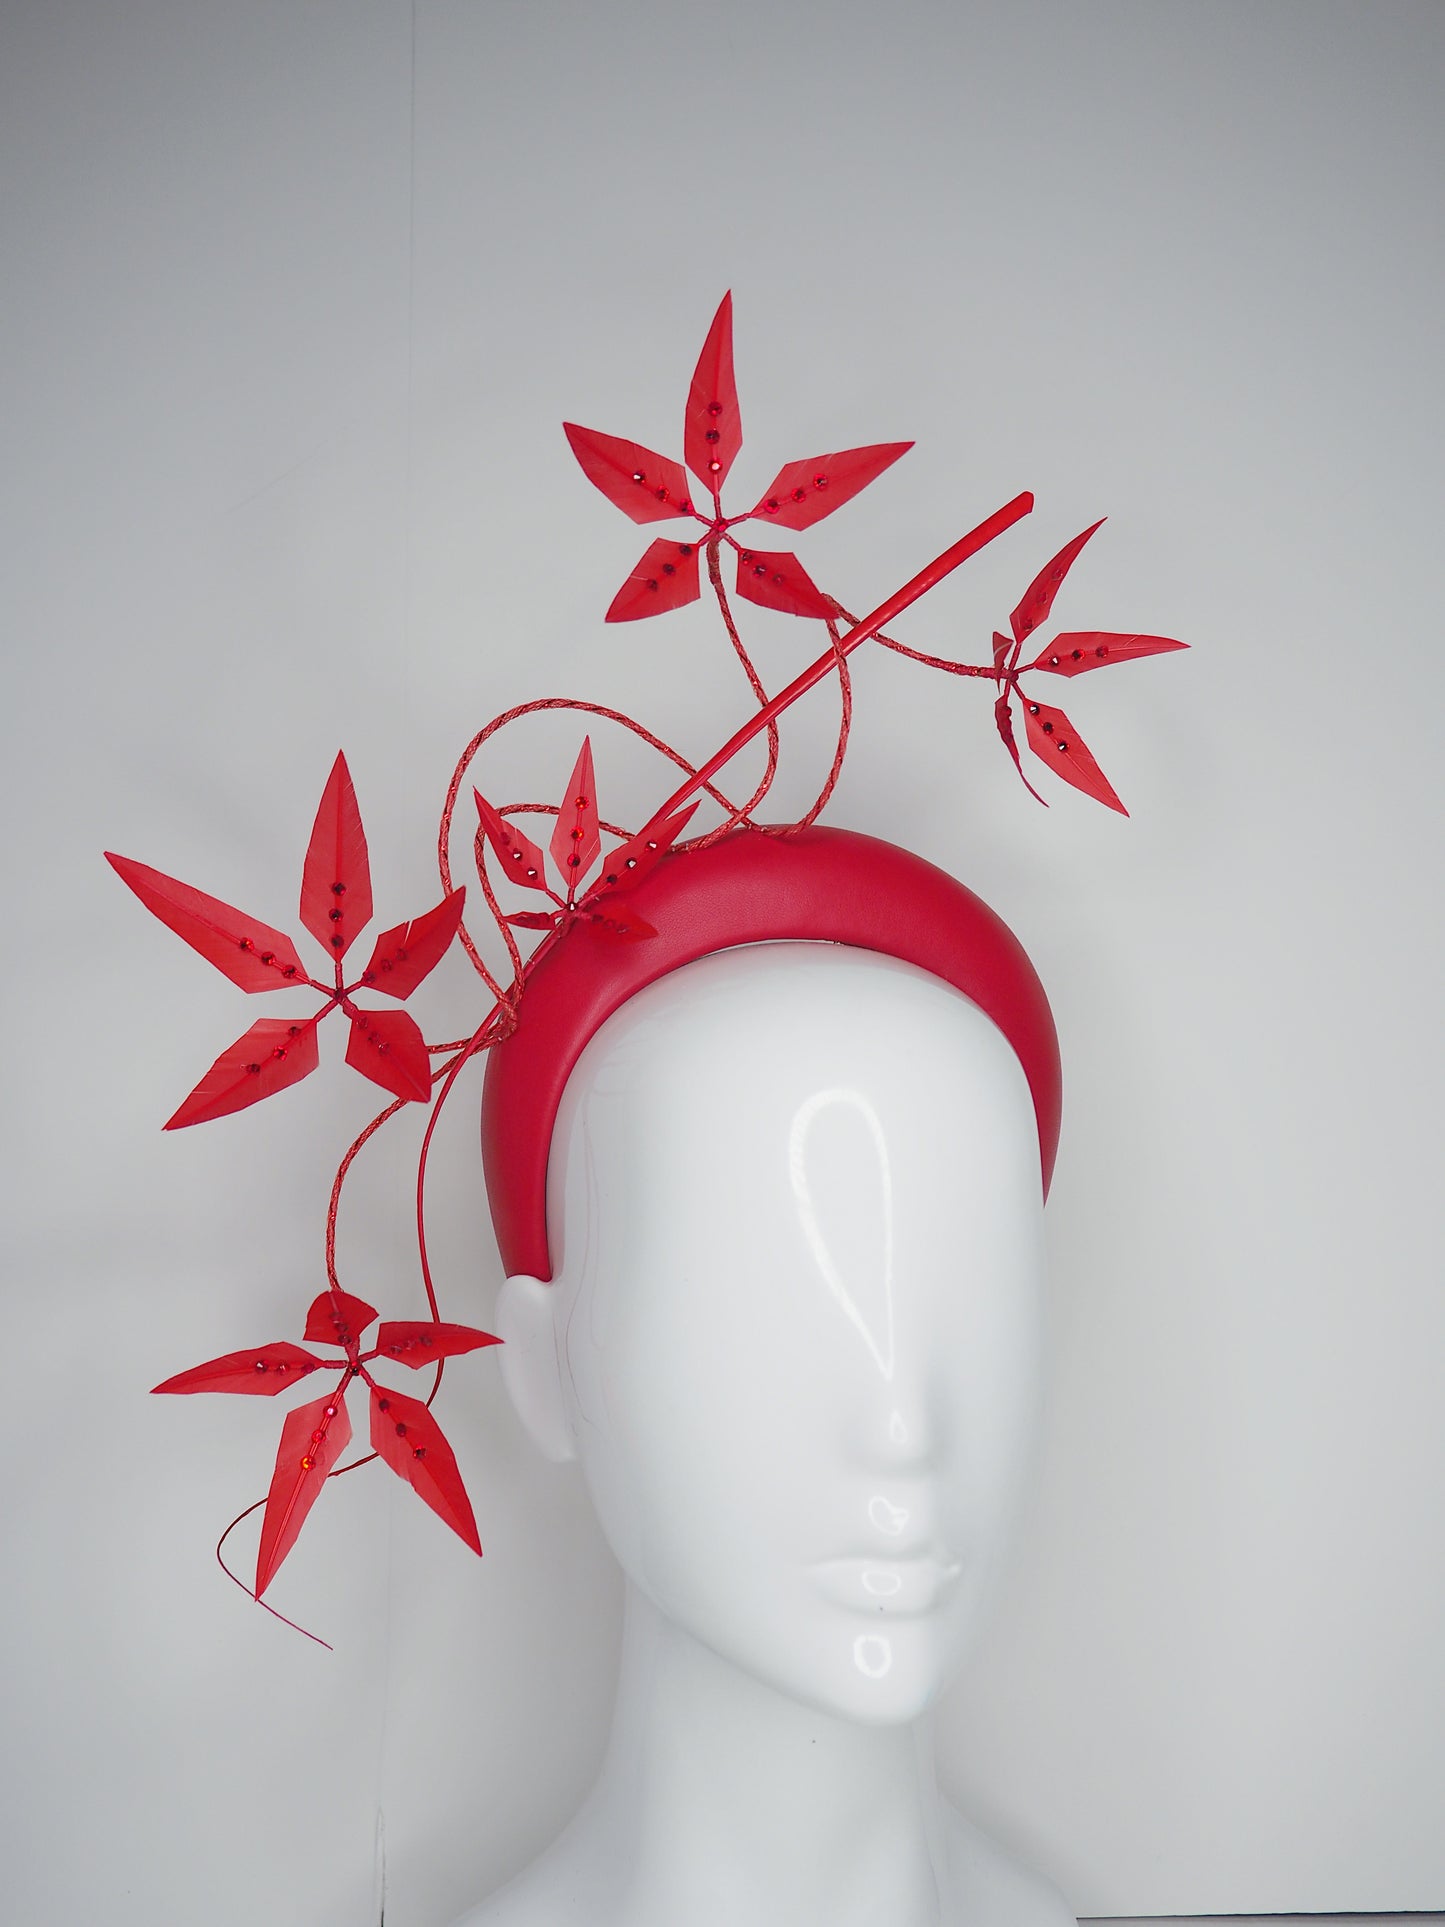 Razzamatazz - Red leather 3d headband with spiky Feather flowers and diamanté detail